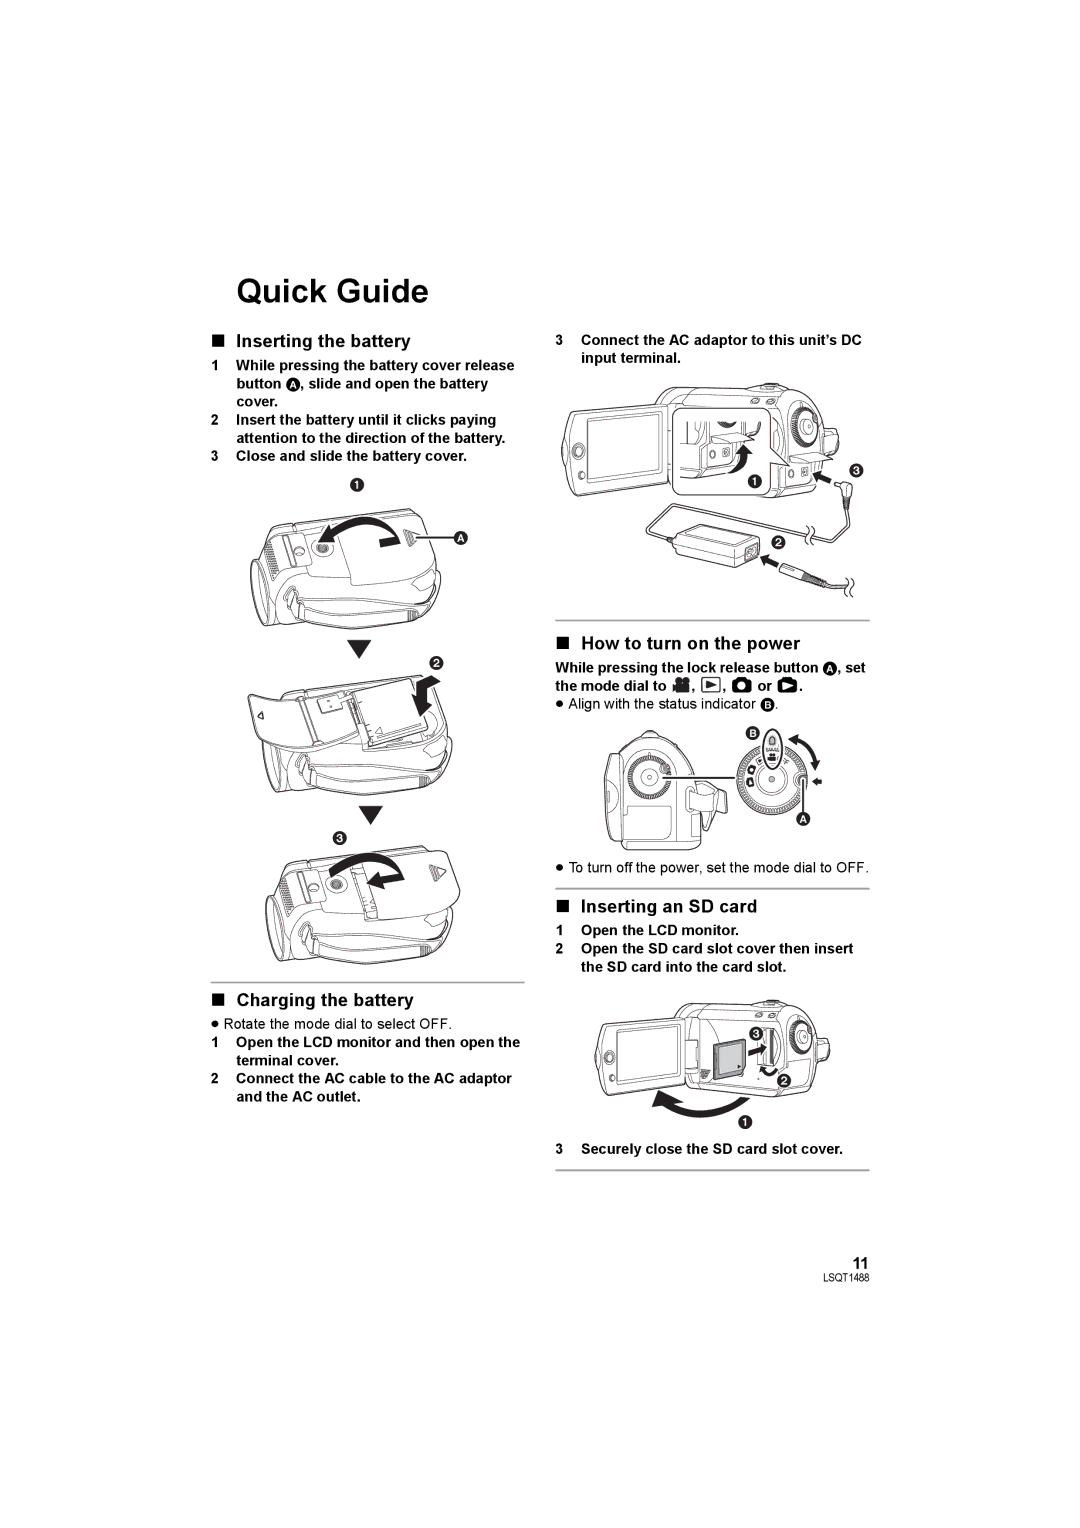 Panasonic SDR-S26PC Quick Guide, Inserting the battery, Charging the battery, How to turn on the power 